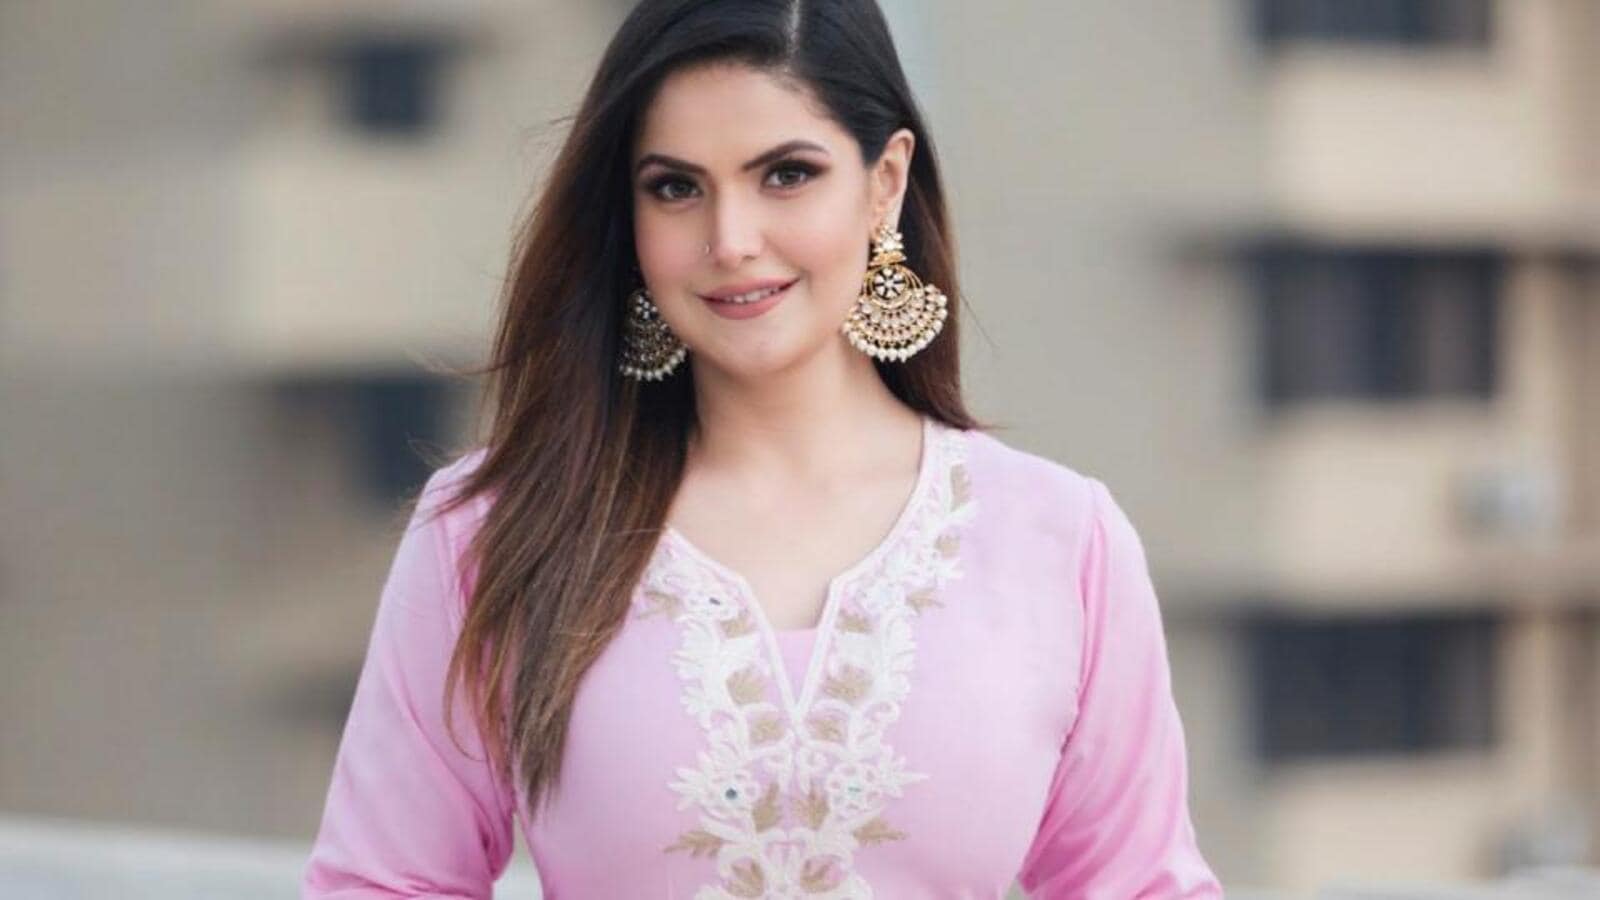 Zareen Khan Pornsex - Zareen Khan: I am much more than my face and body; hope people give me a  chance and not judge me | Bollywood - Hindustan Times